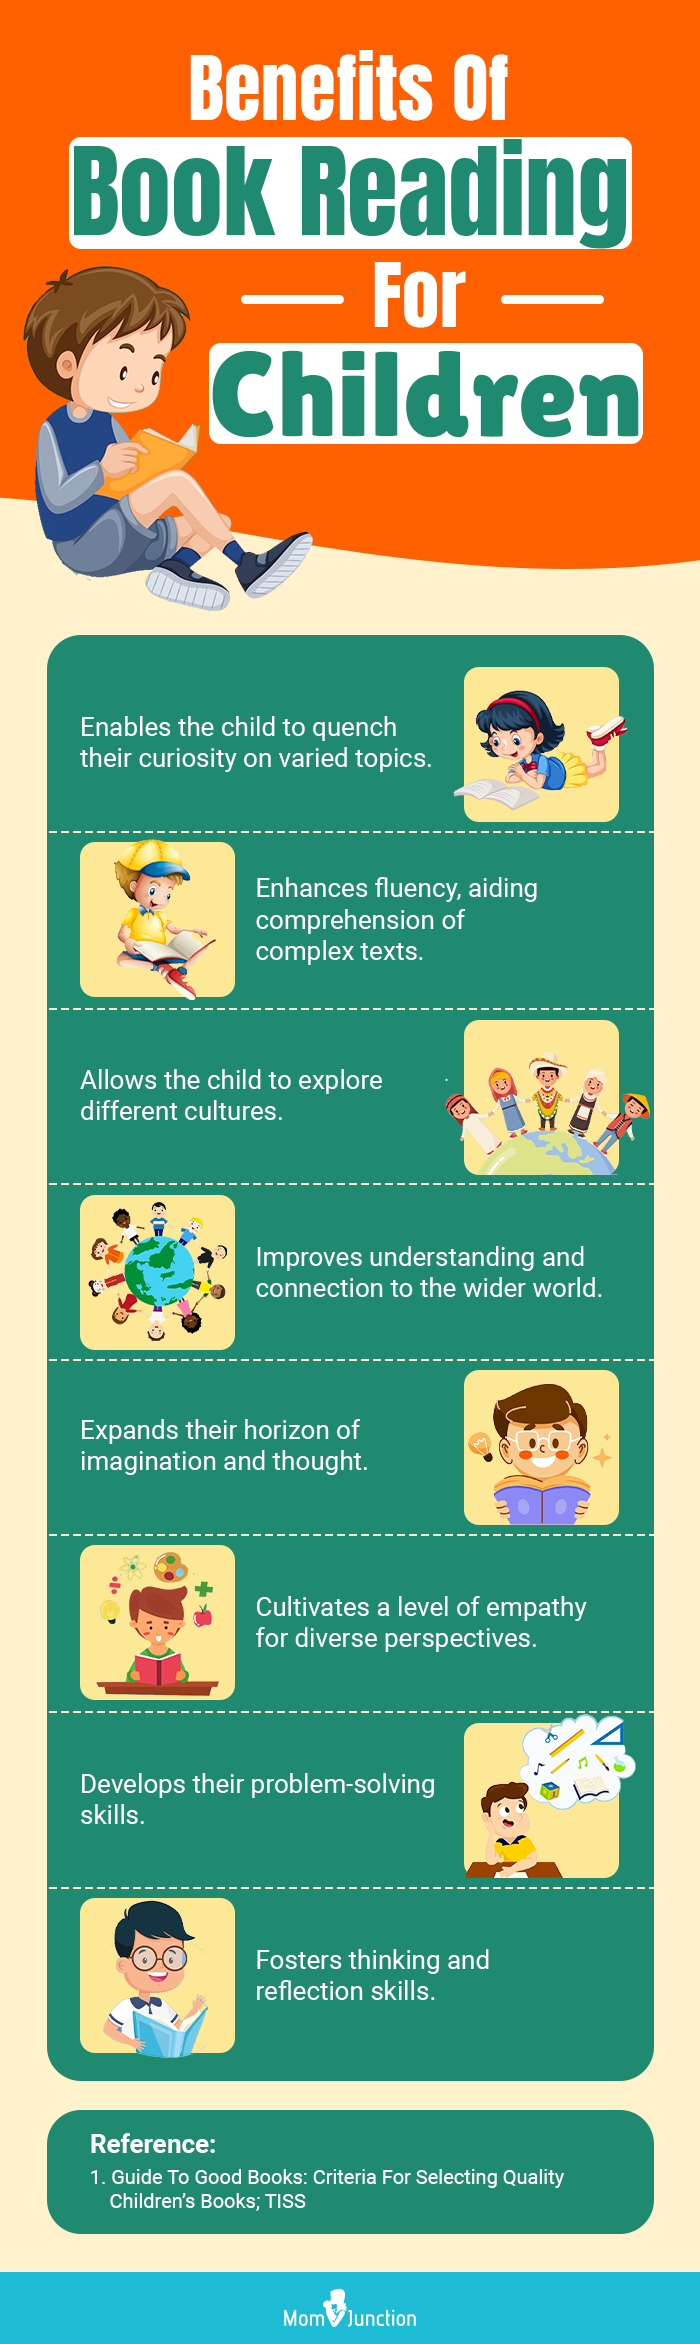 Benefits Of Book Reading For Children (infographic)